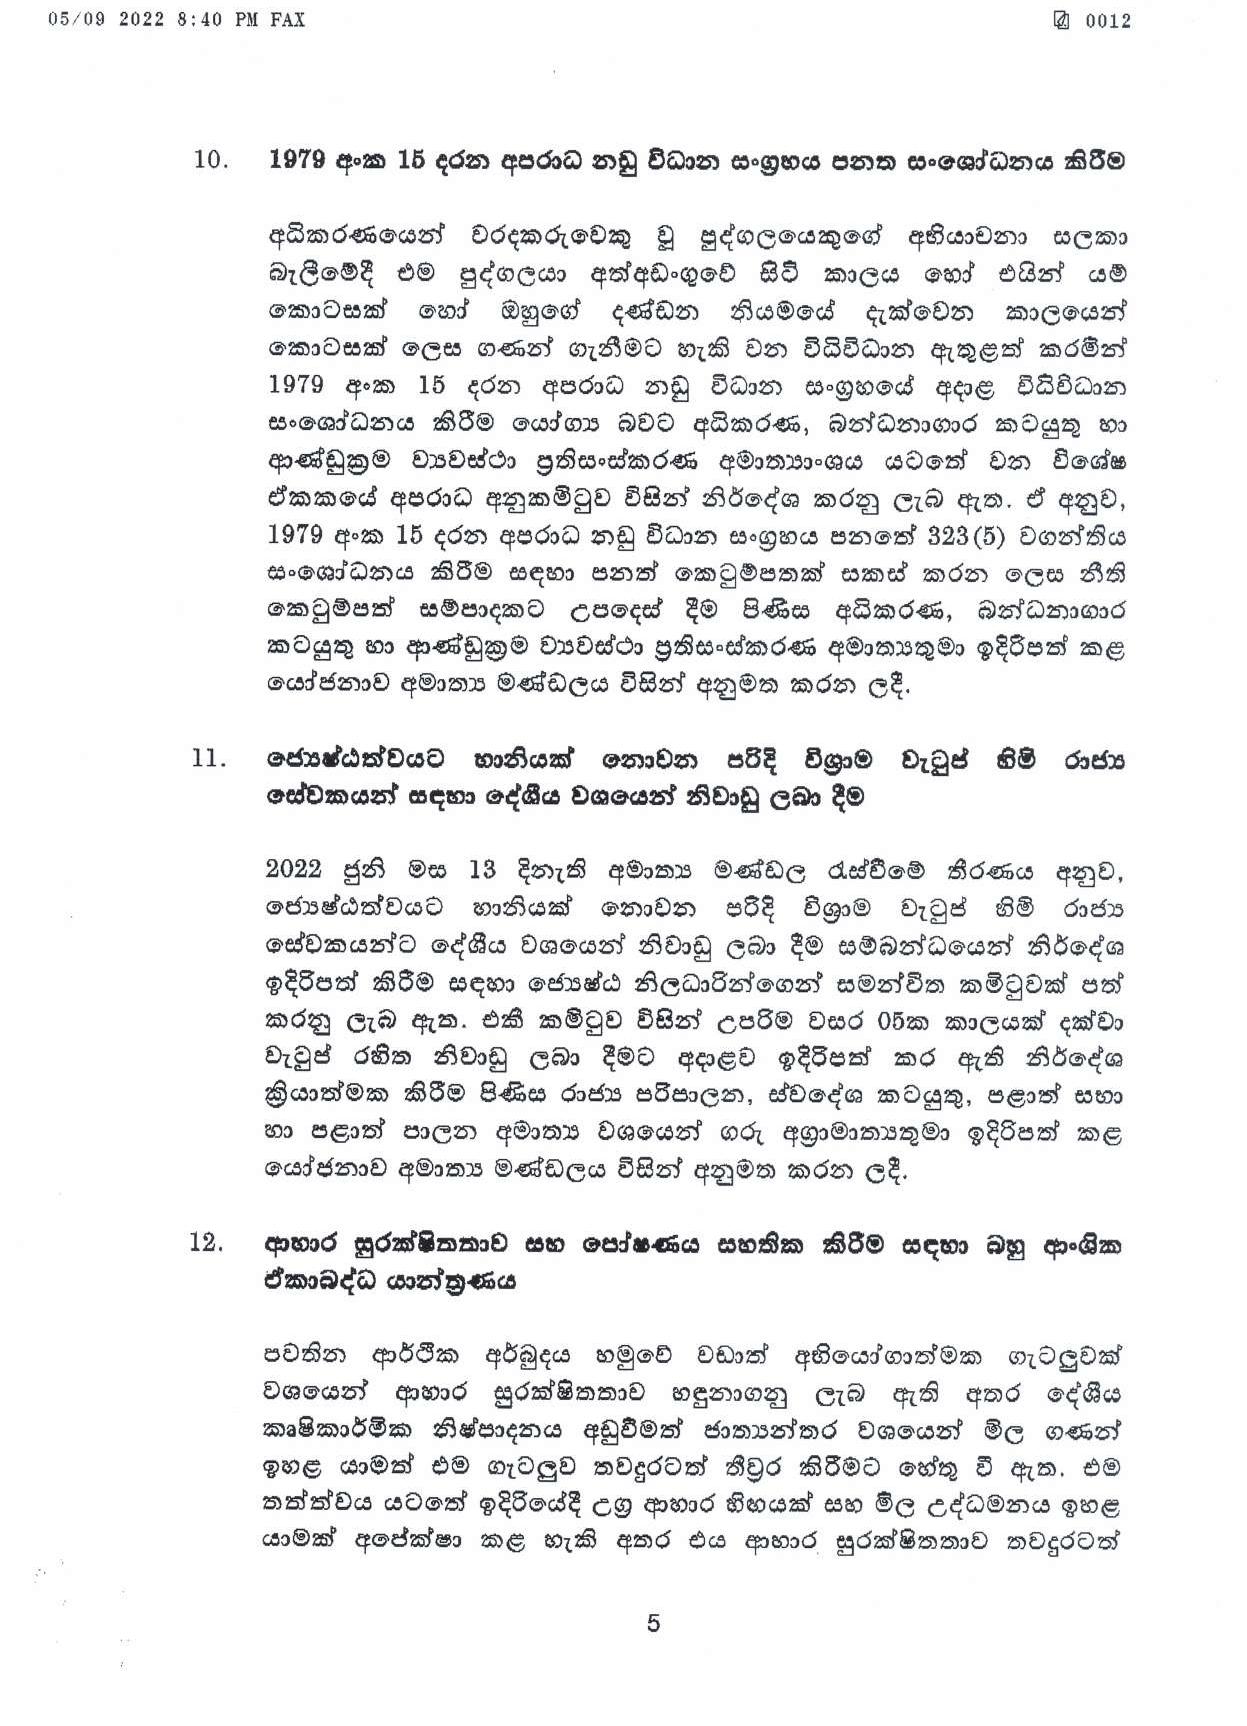 Cabinet Decision on 05.09.2022 page 005